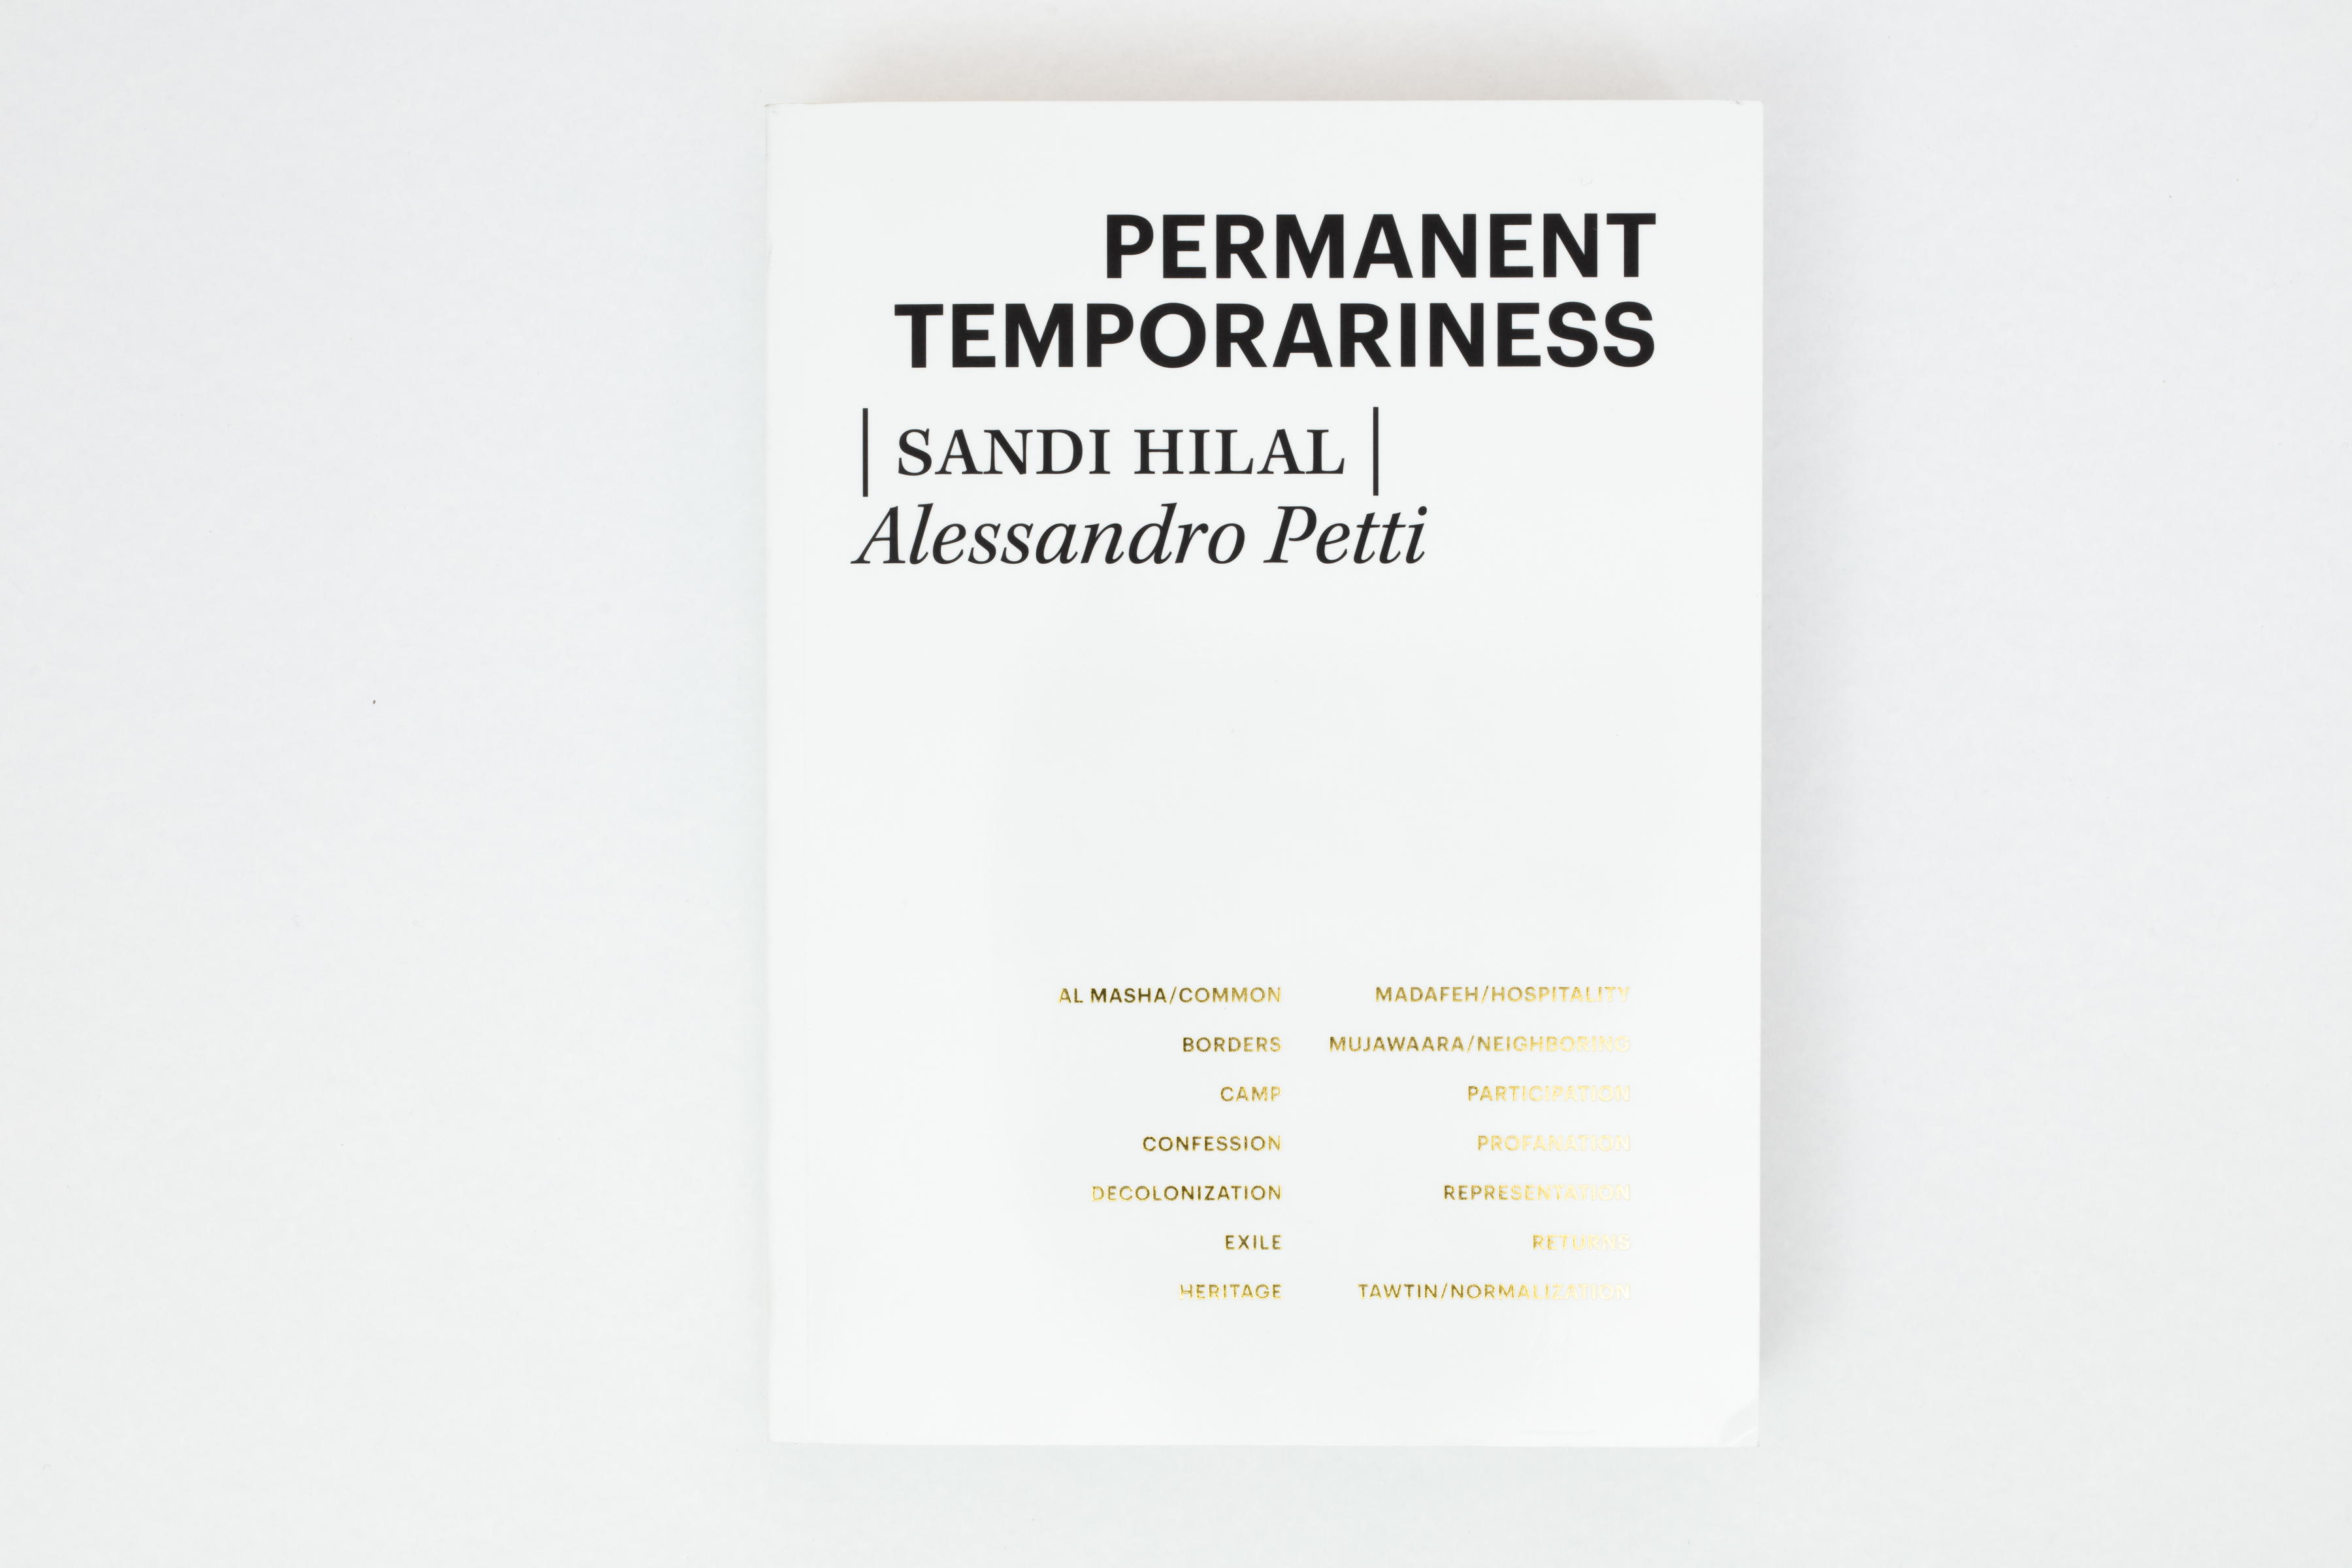 Permanent Temporariness, Art and Theory Publishing, 2018